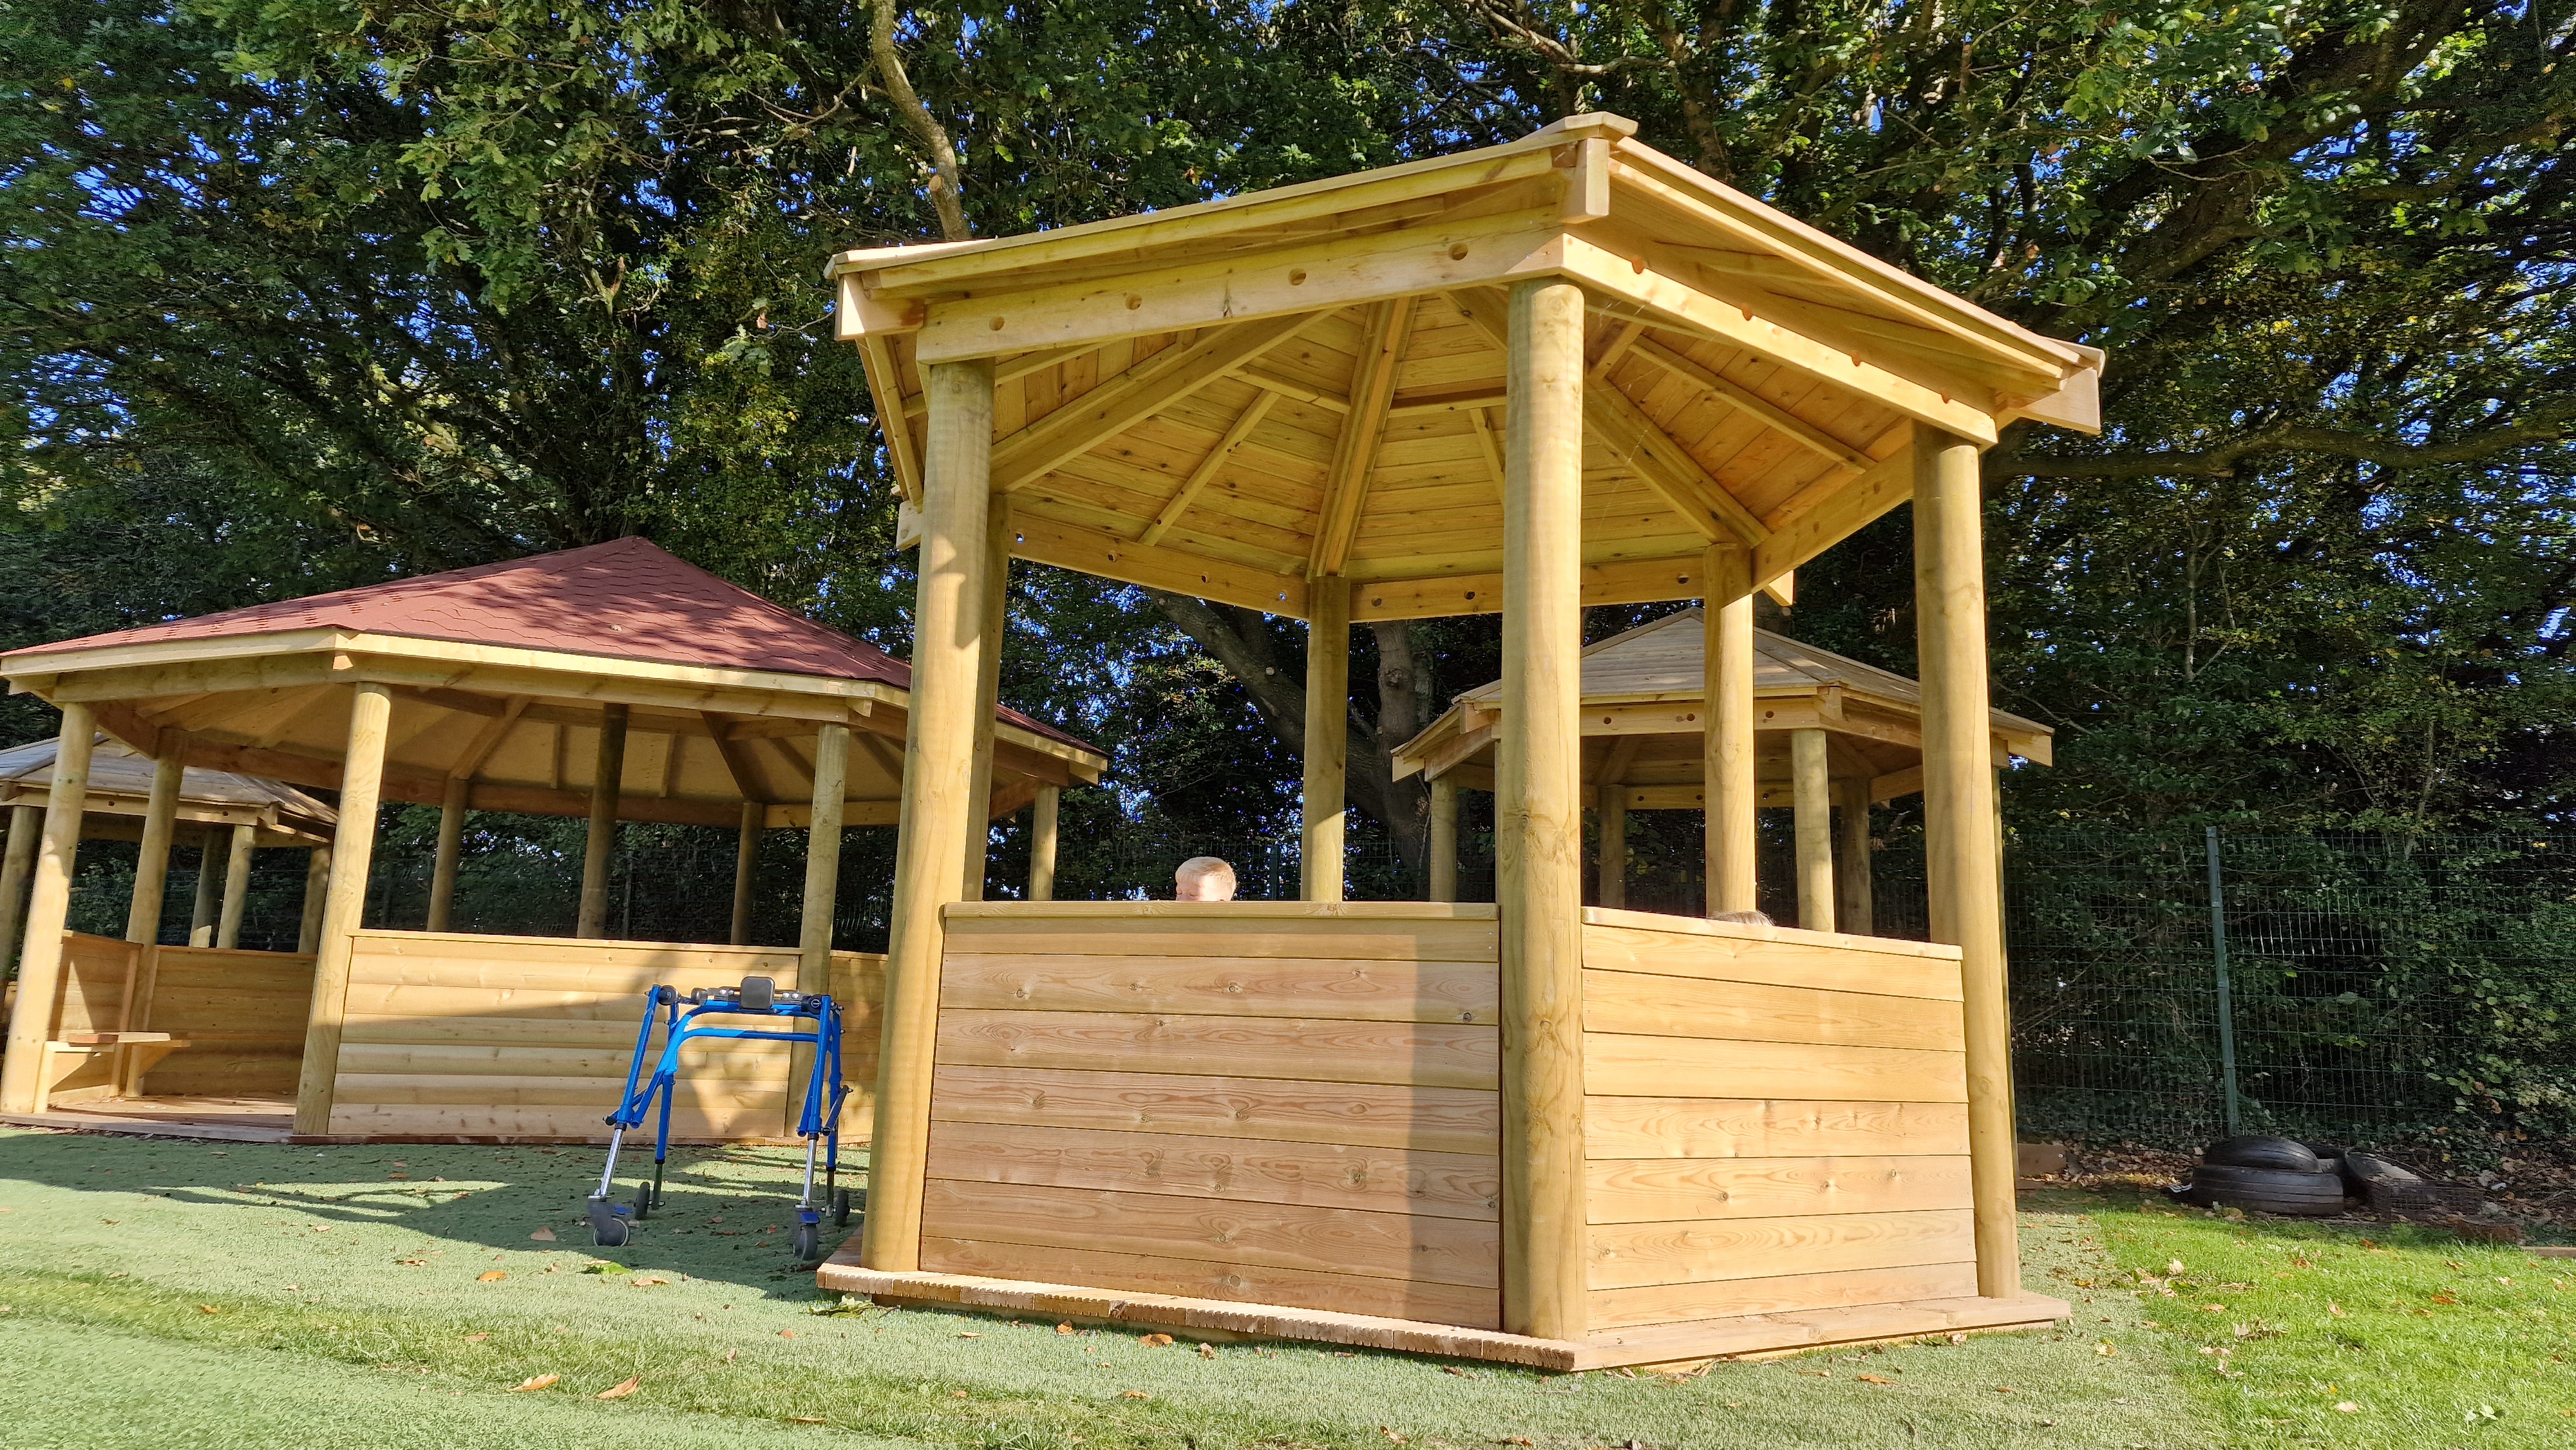 A side view of the smaller gazebo in a primary school setting